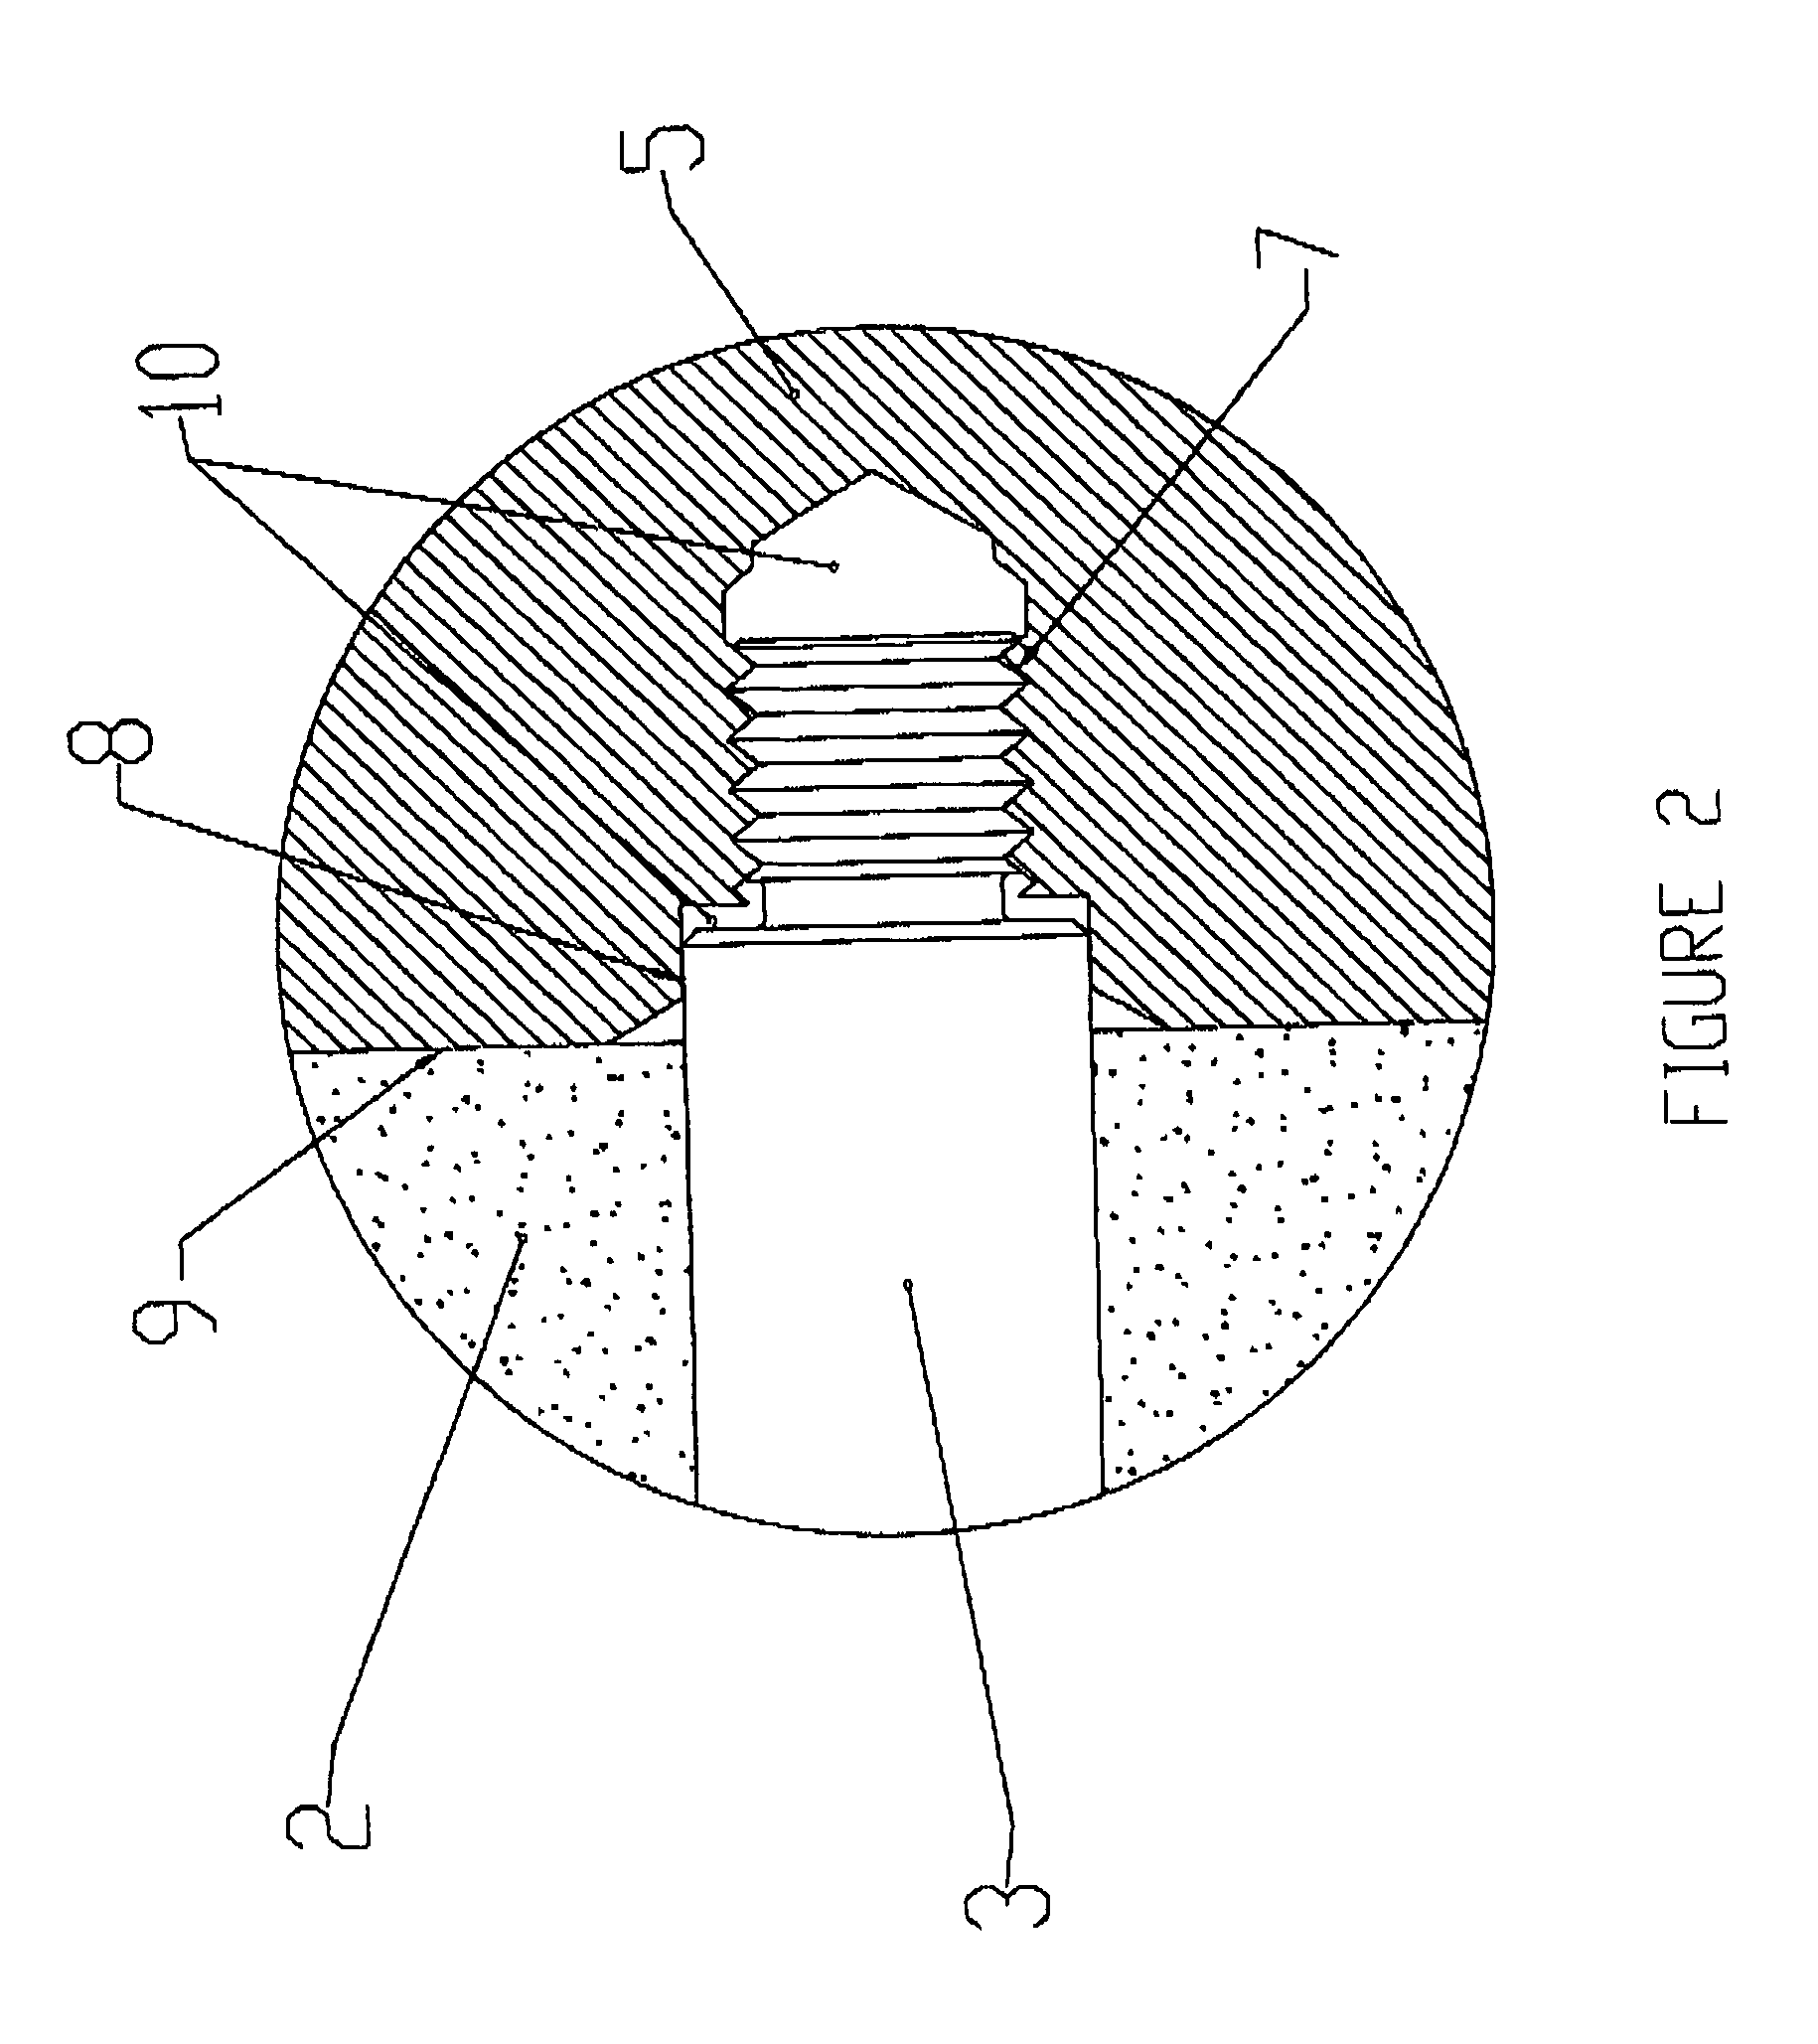 Permanent magnet rotor construction wherein relative movement between components is prevented